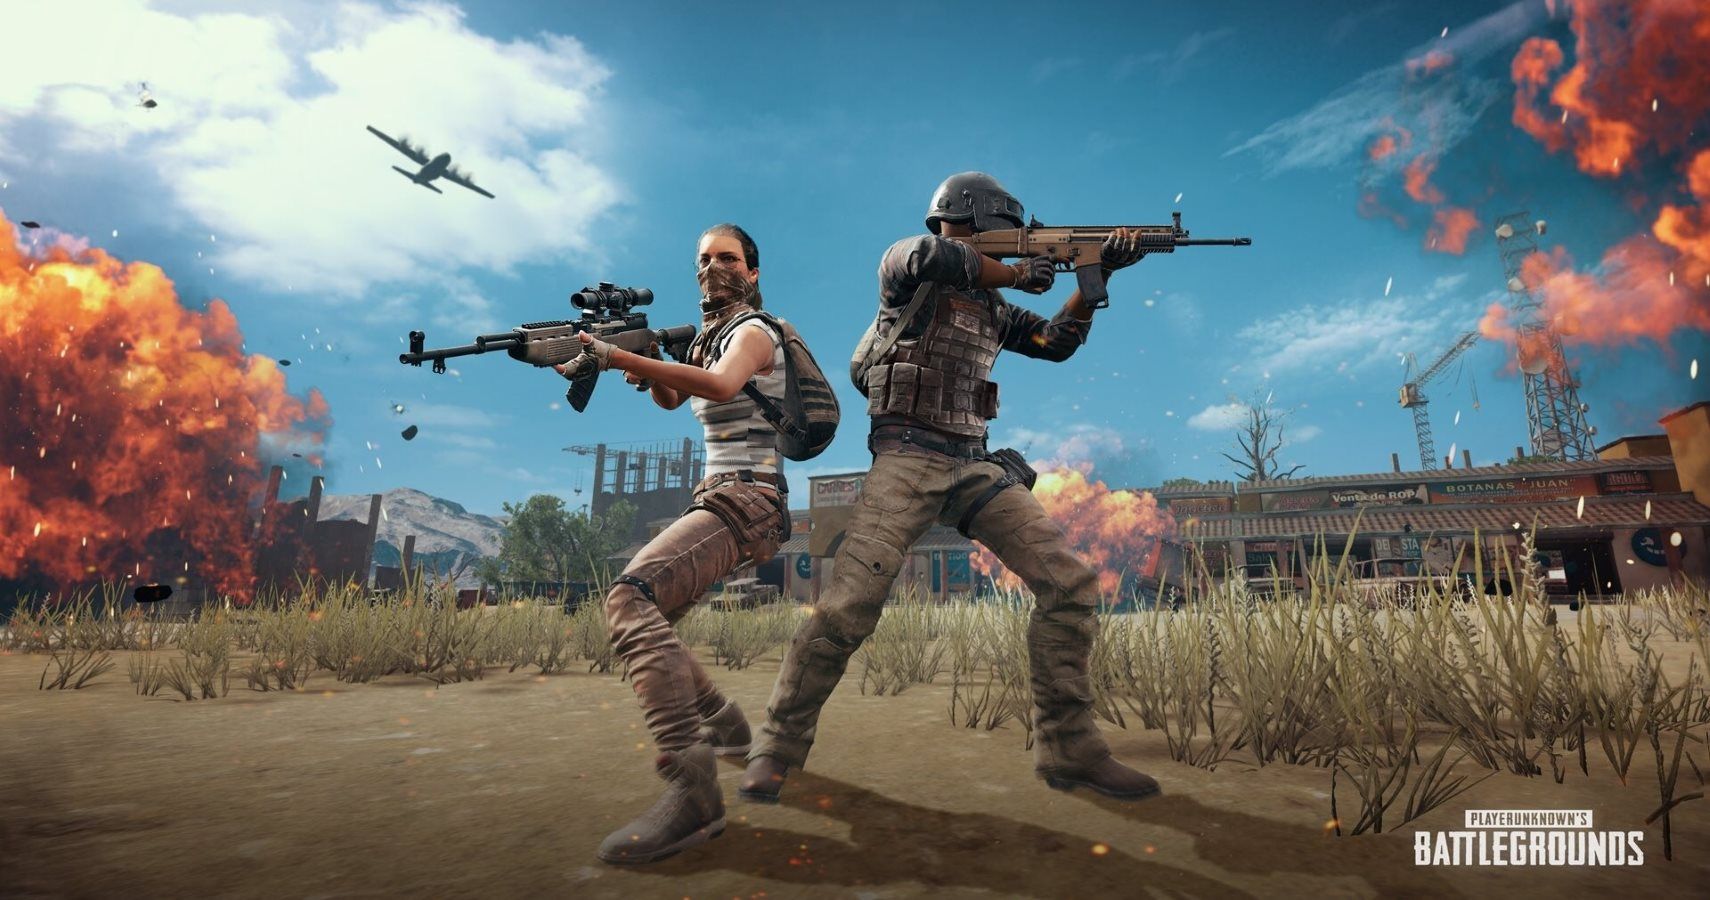 Since January 141 Chinese Hackers Have Been Arrested For Creating PUBG Cheats